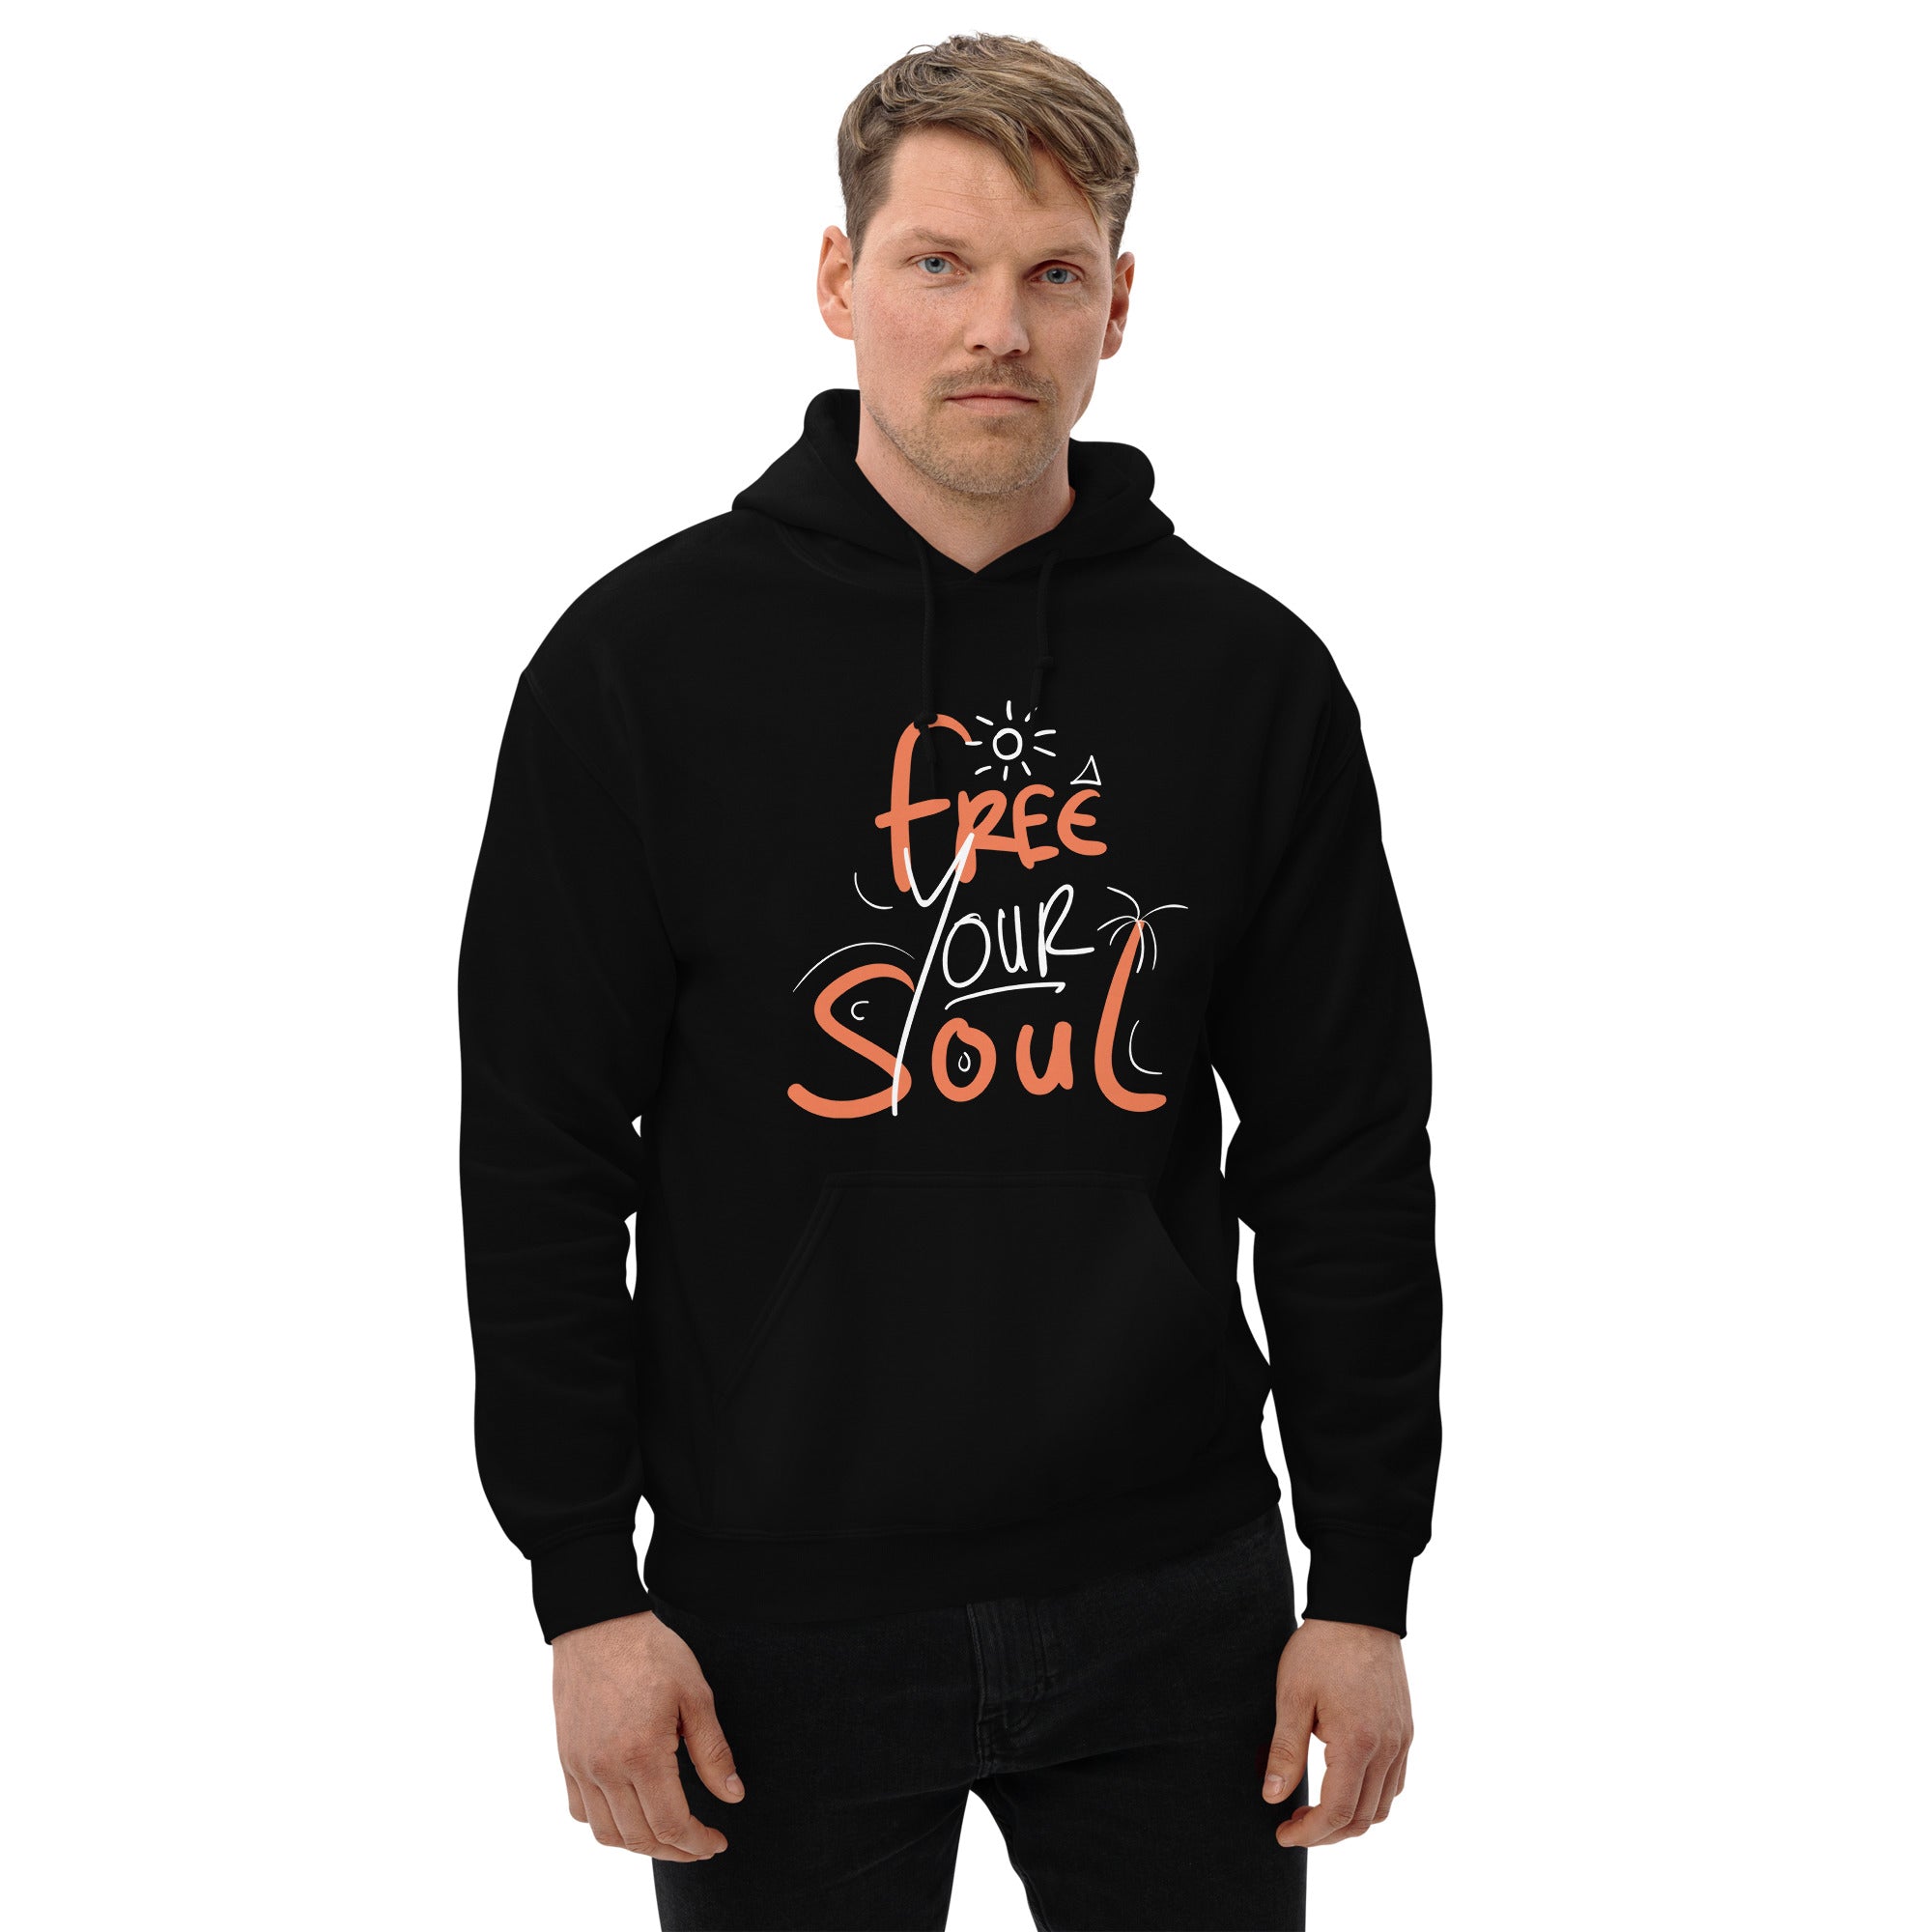 Free Your Soul - Unisex Hoodie